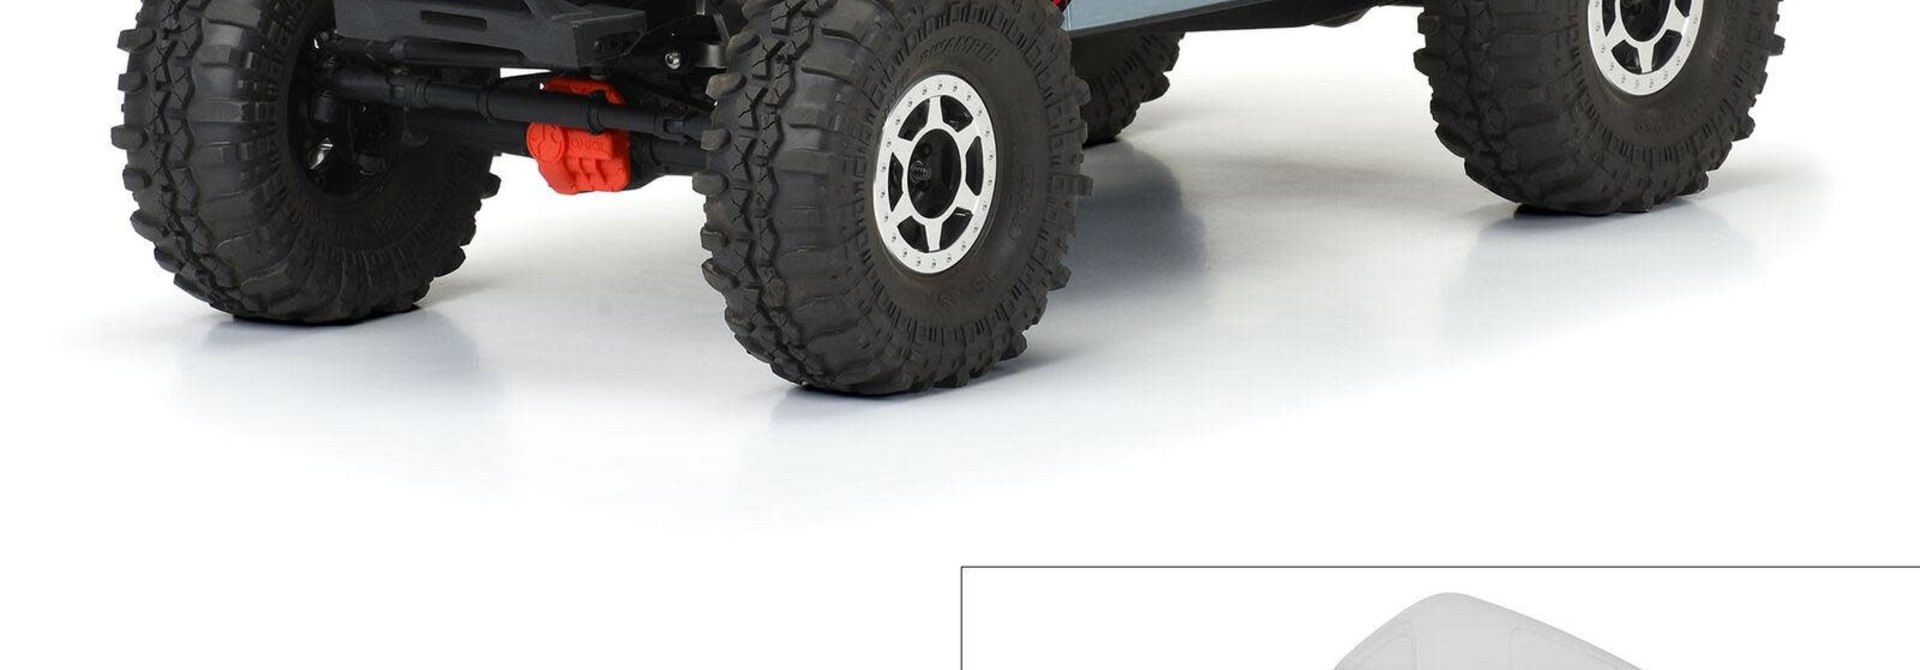 Proline 1/10 Comp Wagon Cab-Only Clear Body 12.3" (313mm) Wheelbase Crawlers